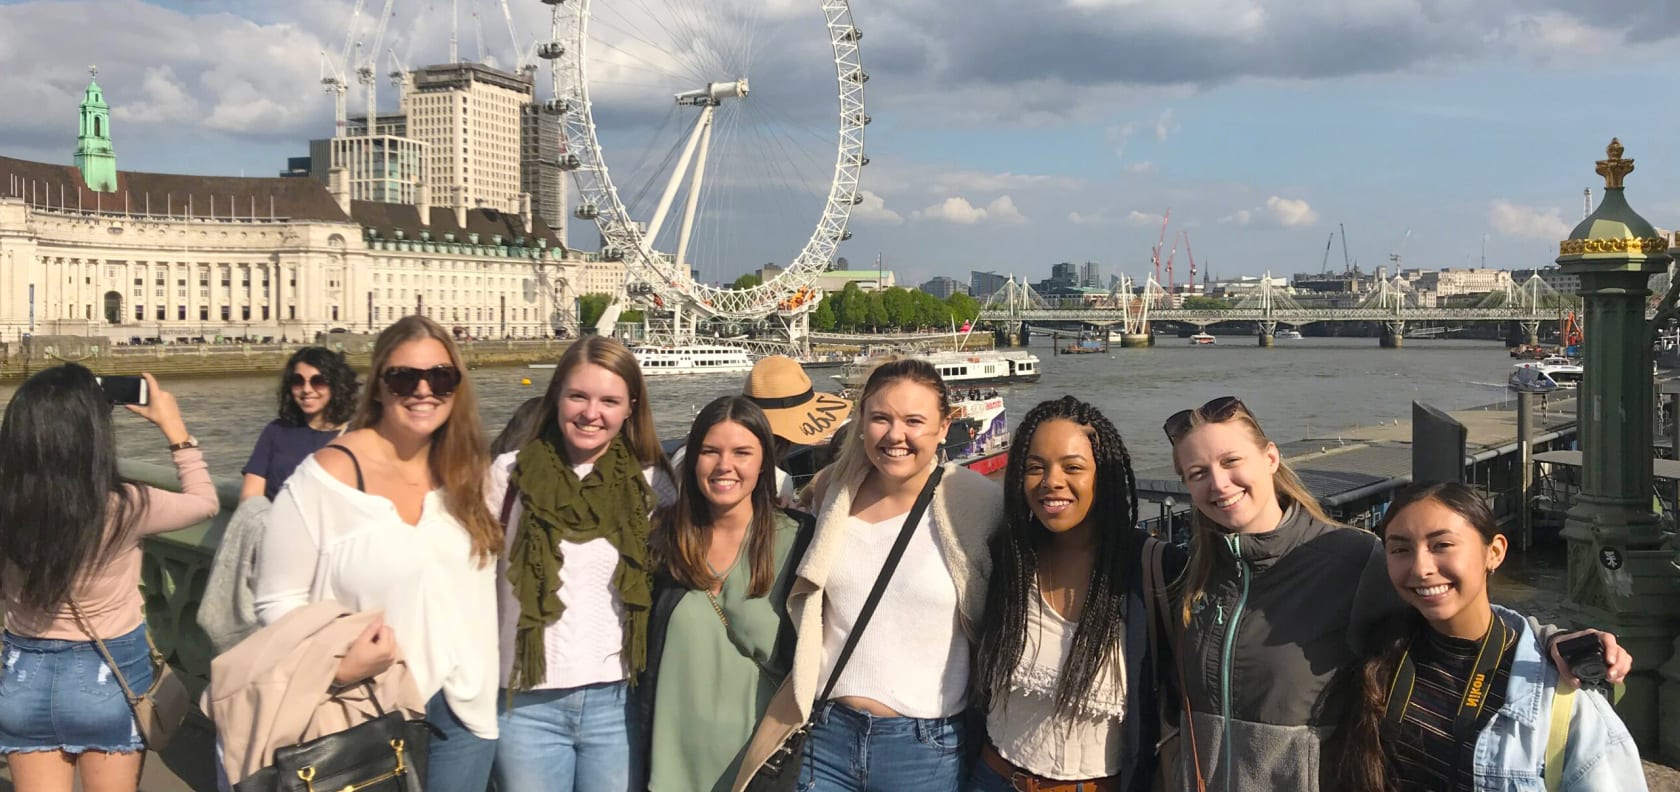 A group of students on a bridge in London.